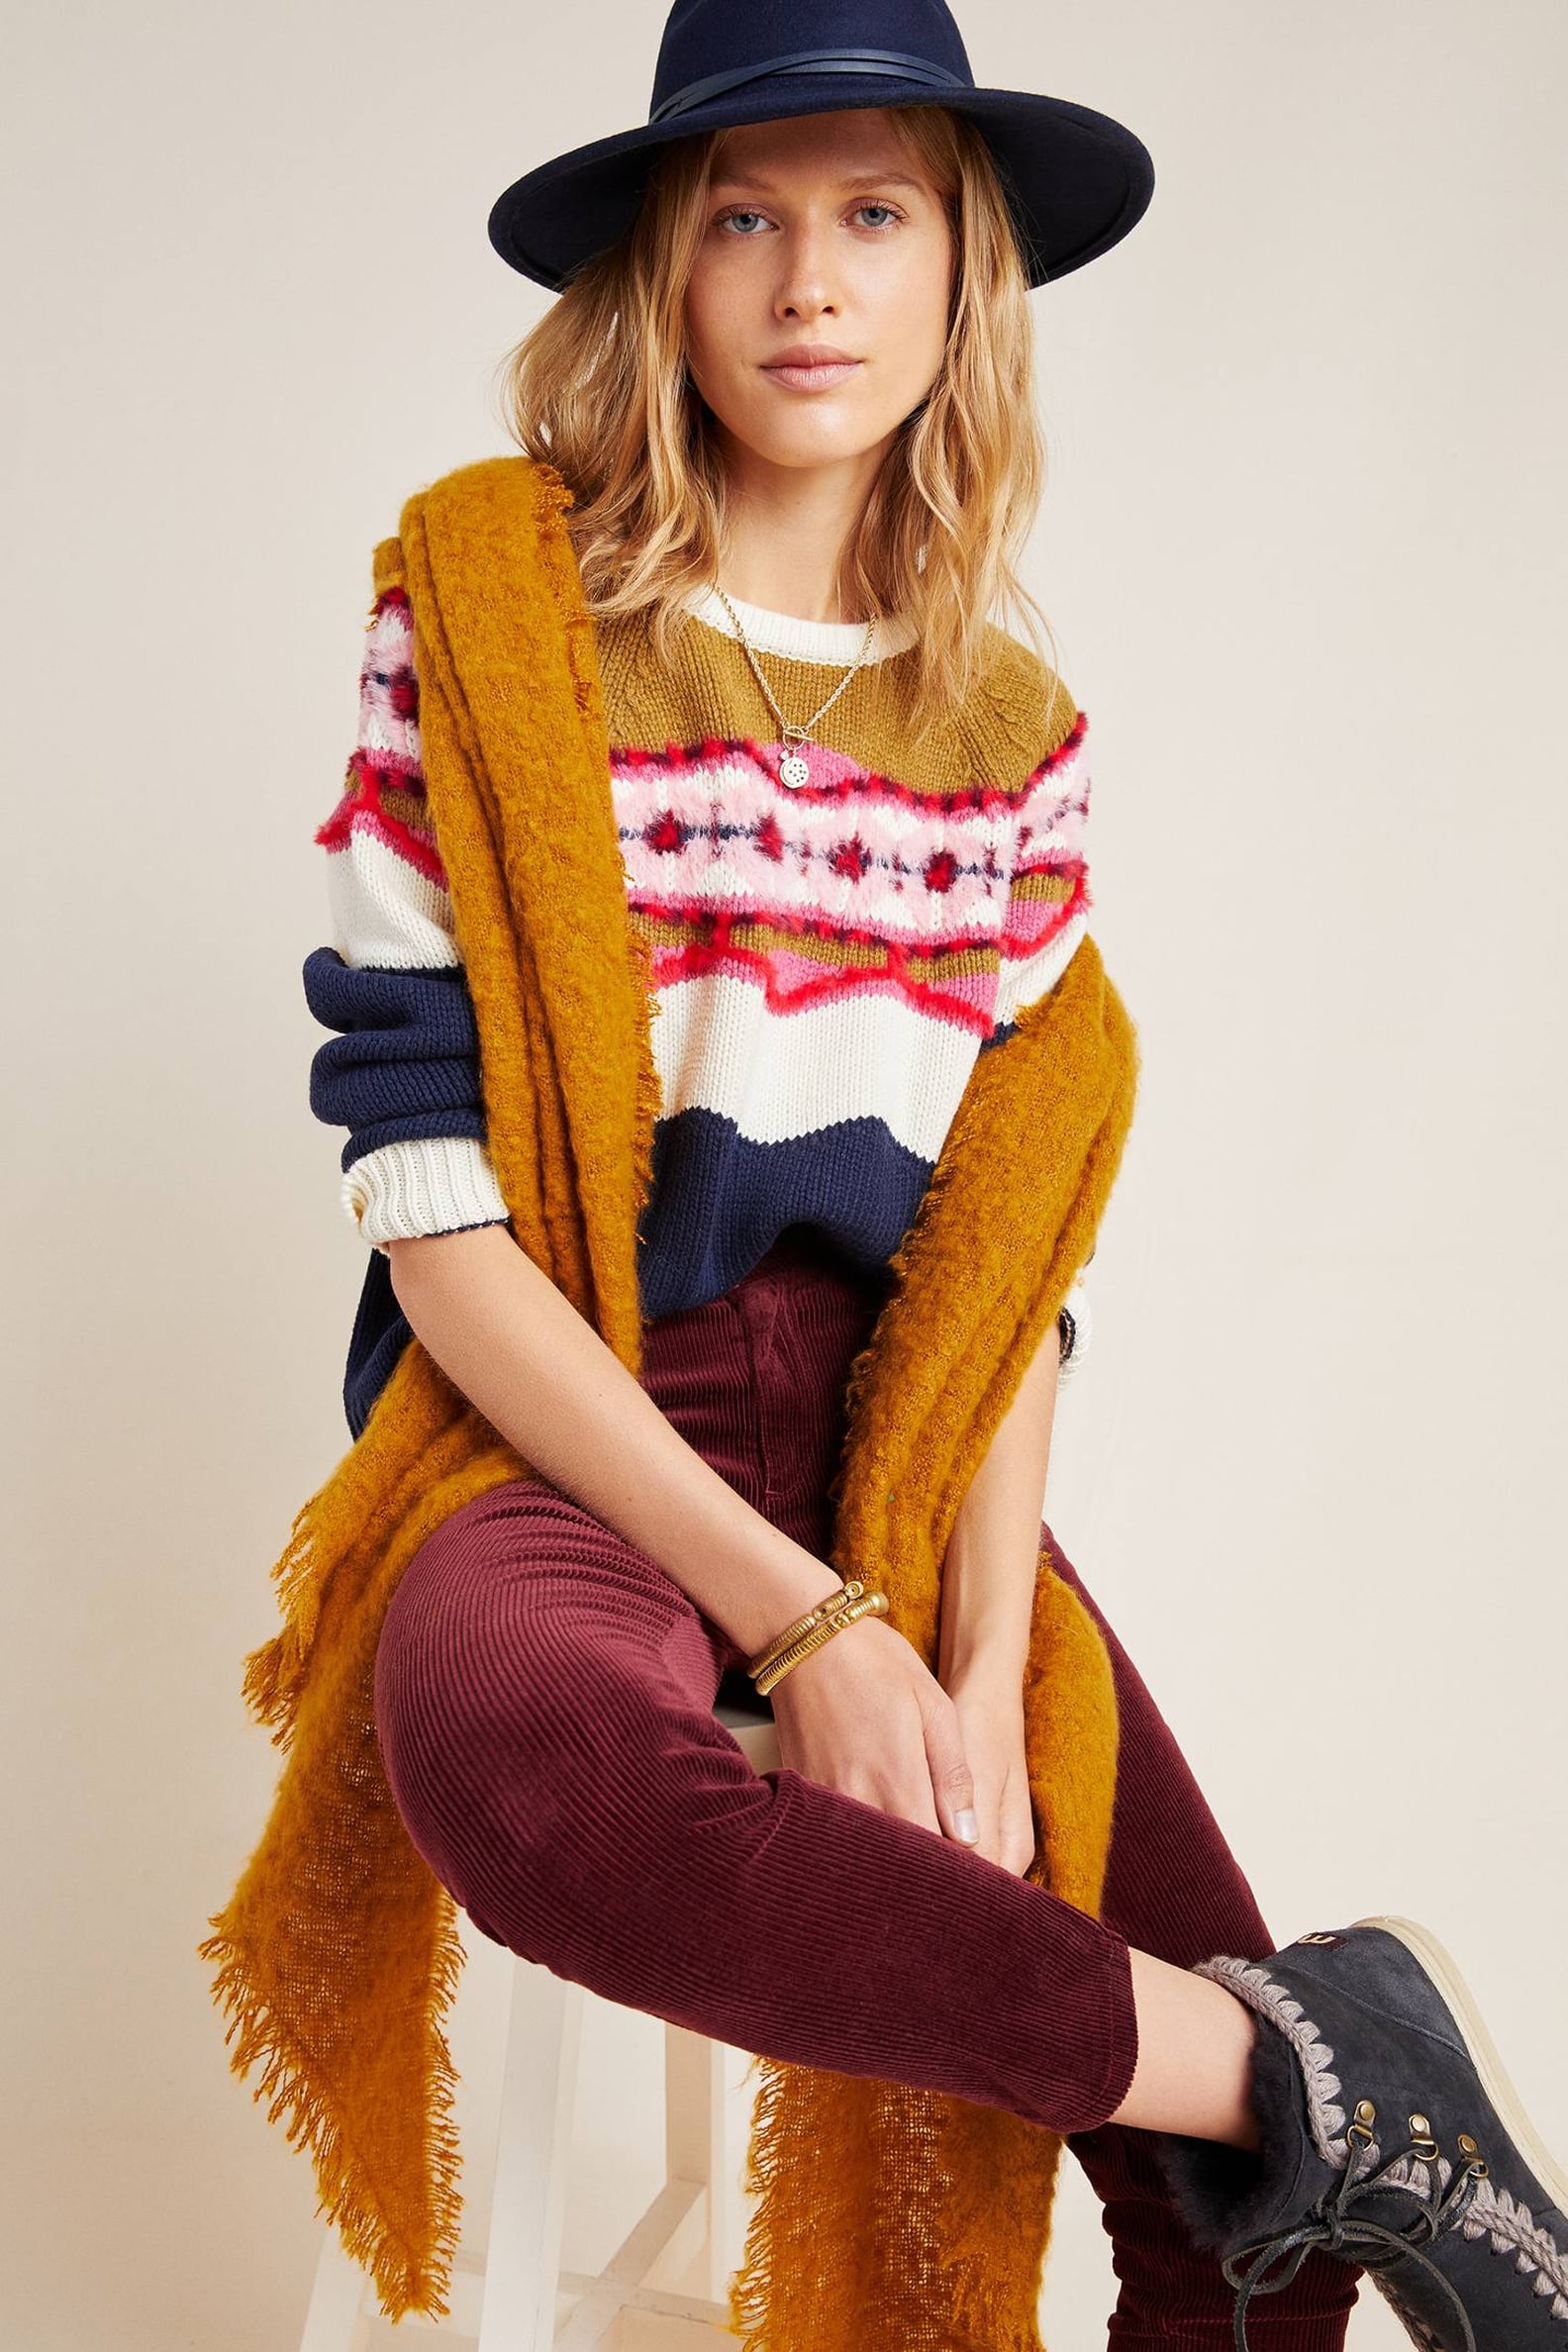 New Anthropologie Holiday Clothes For Women 2019 | POPSUGAR Fashion